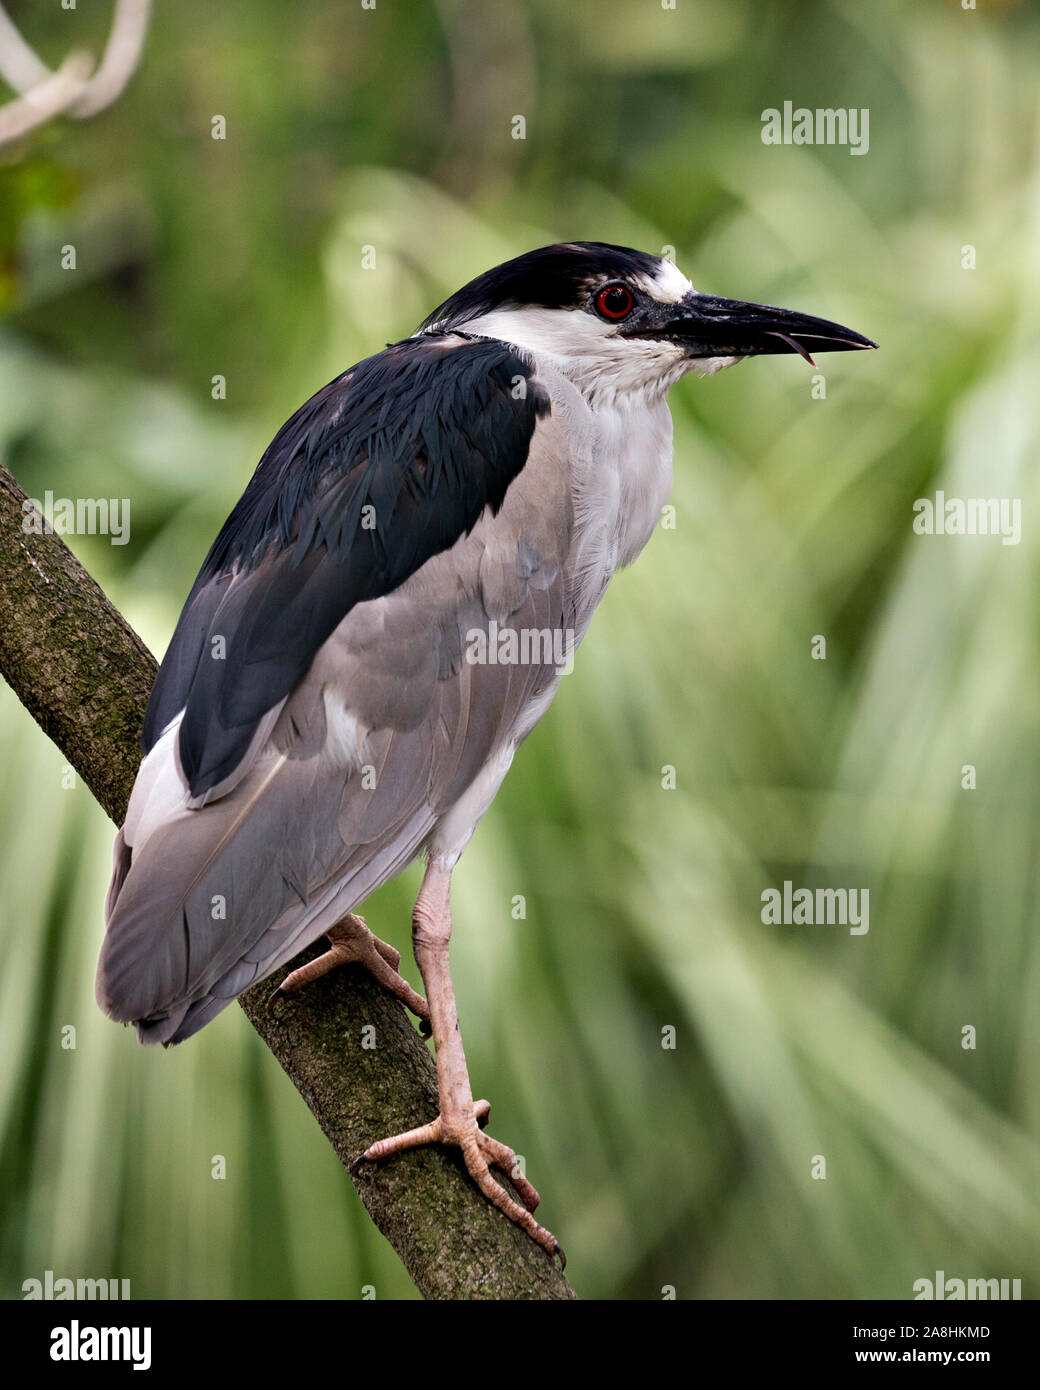 Black crowned Night-heron adult bird closeup perched and  displaying its plumage, head, beak, eye,  and enjoying its surrounding and environment with Stock Photo